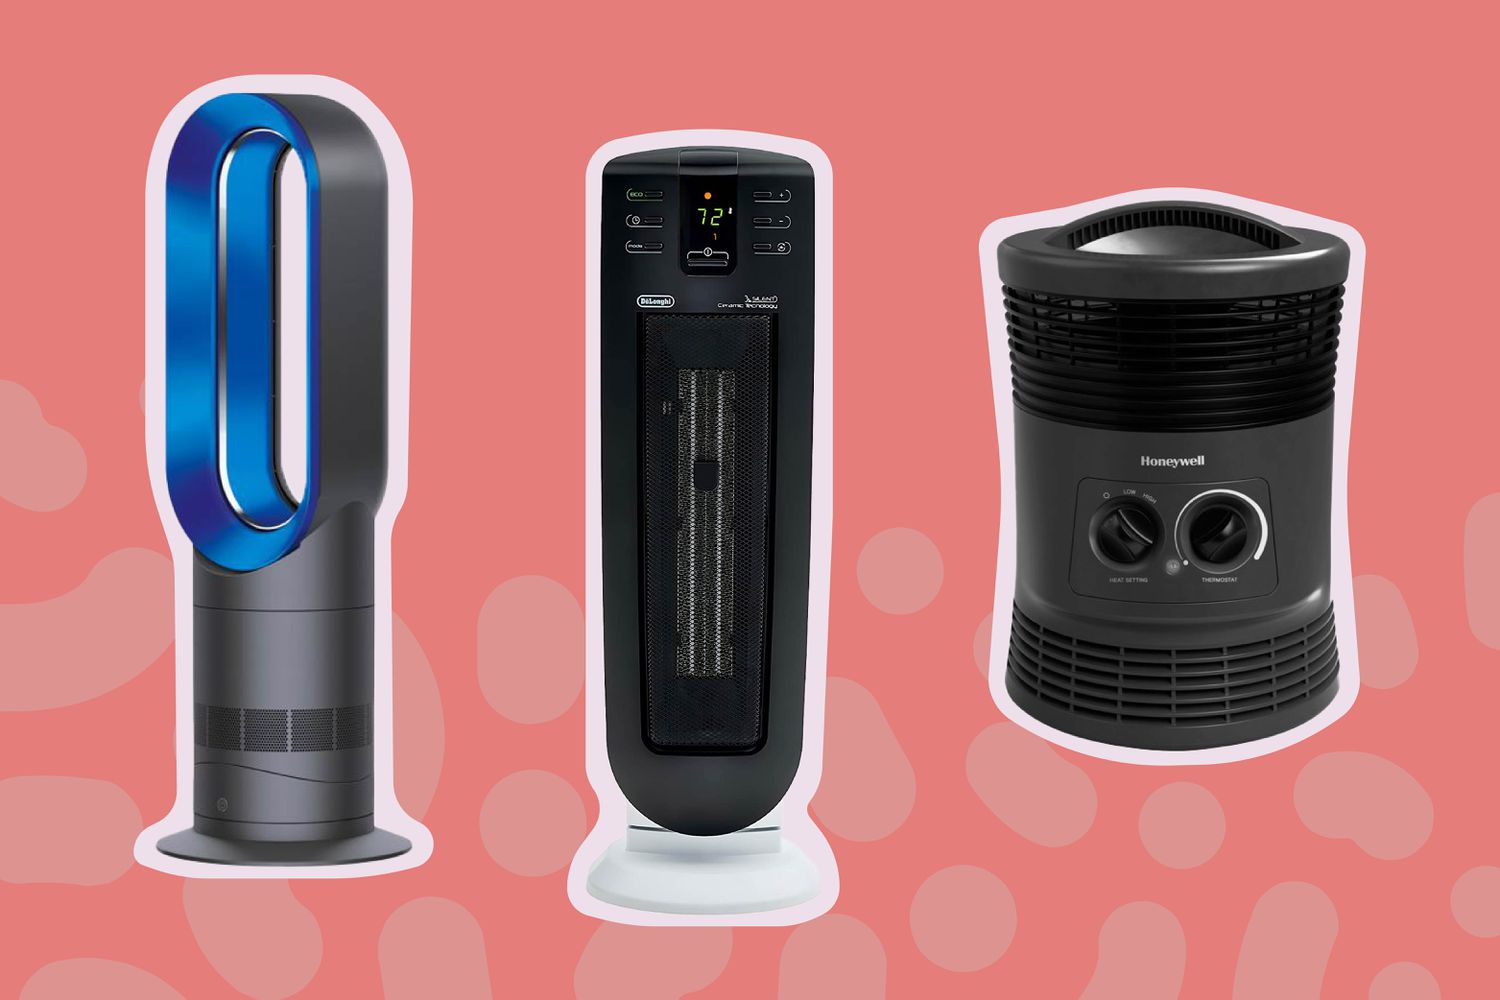 Most Energy Efficient Space Heaters